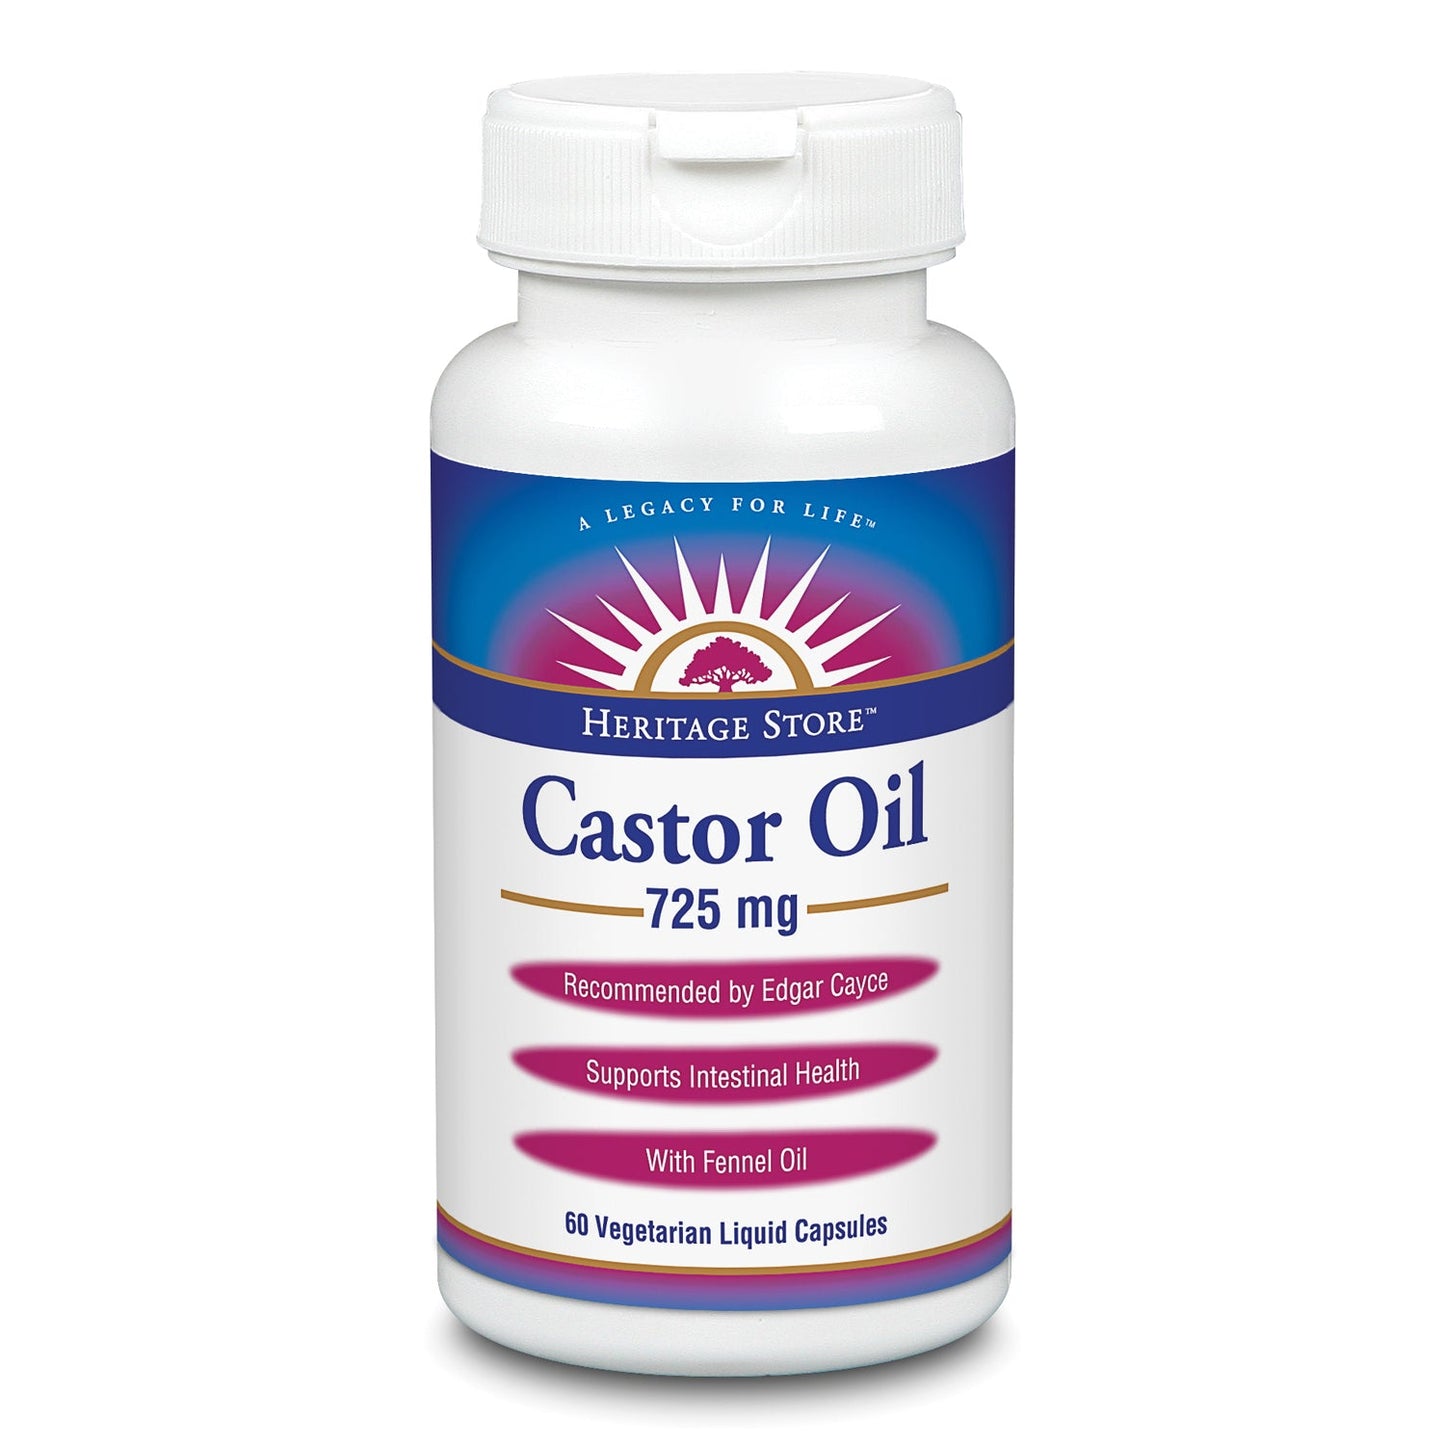 Heritage Store Castor Oil 725 mg | Healthy Intestinal Balance & Digestion Support | With Fennel Oil | 60 Caps